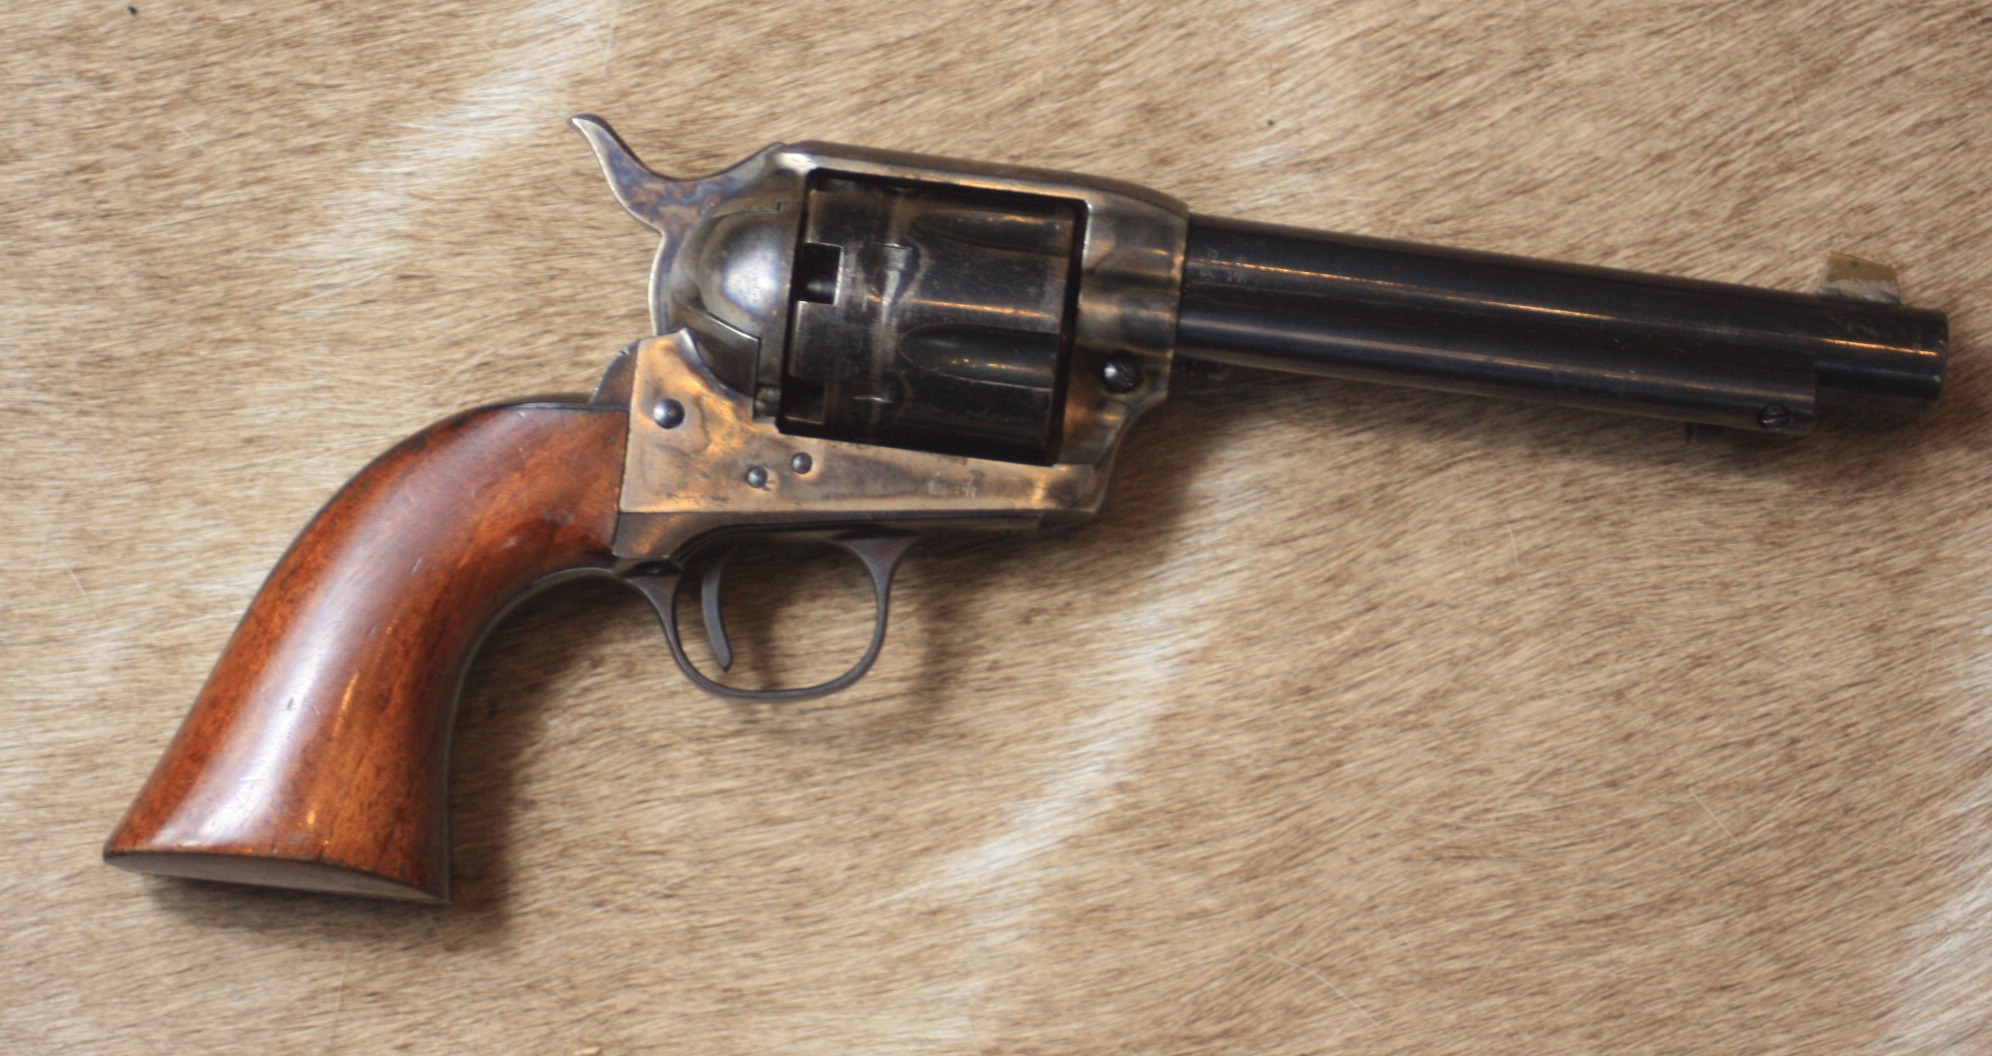 A REPRODUCTION .44 PERCUSSION REVOLVER, MODEL 'SINGLE ACTION ARMY'  Peacemaker